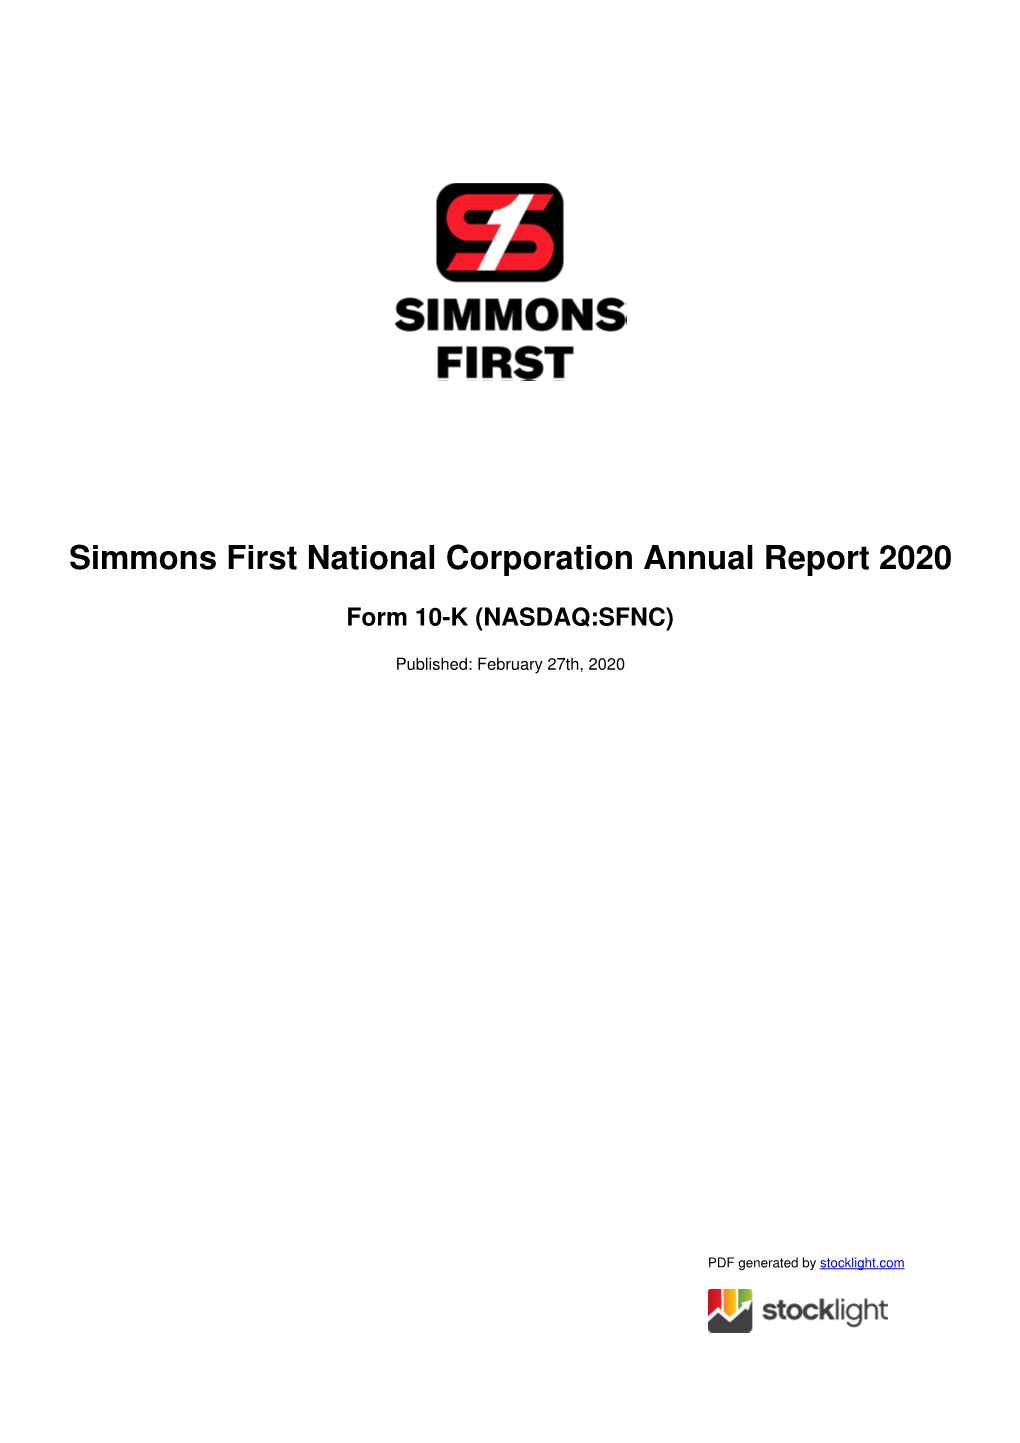 Simmons First National Corporation Annual Report 2020